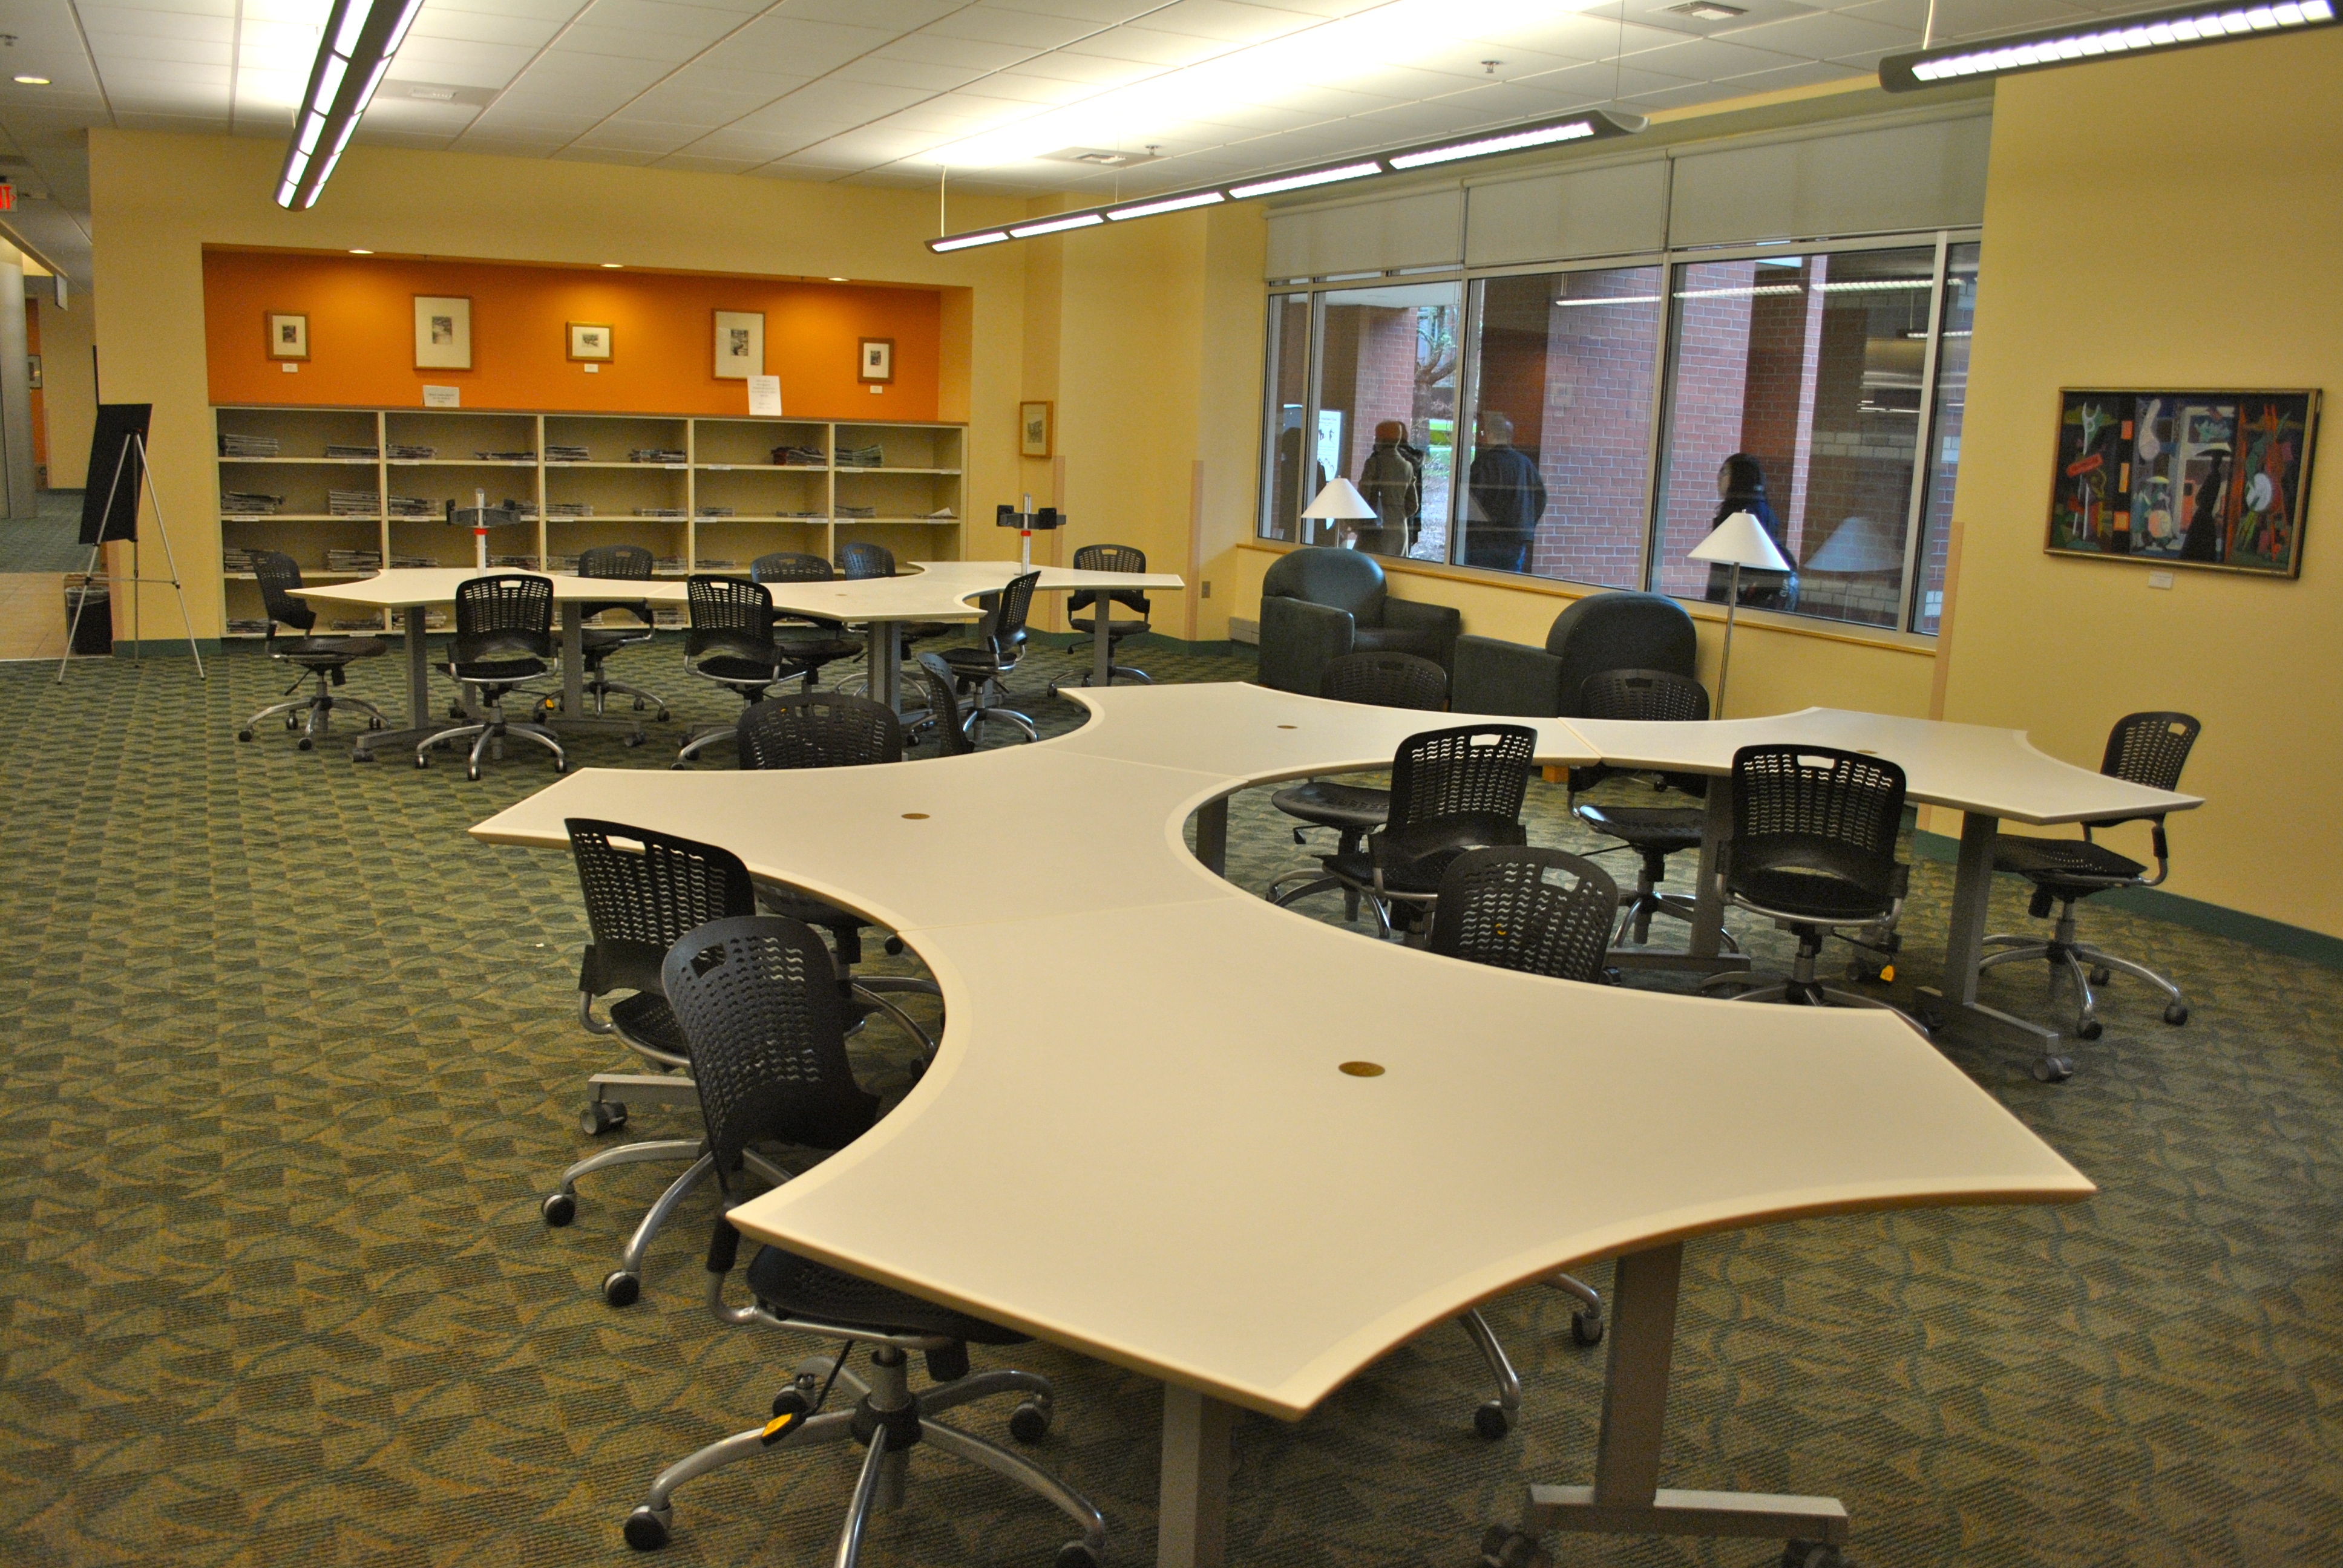 A large classroom with curved tables and chairs on wheels.